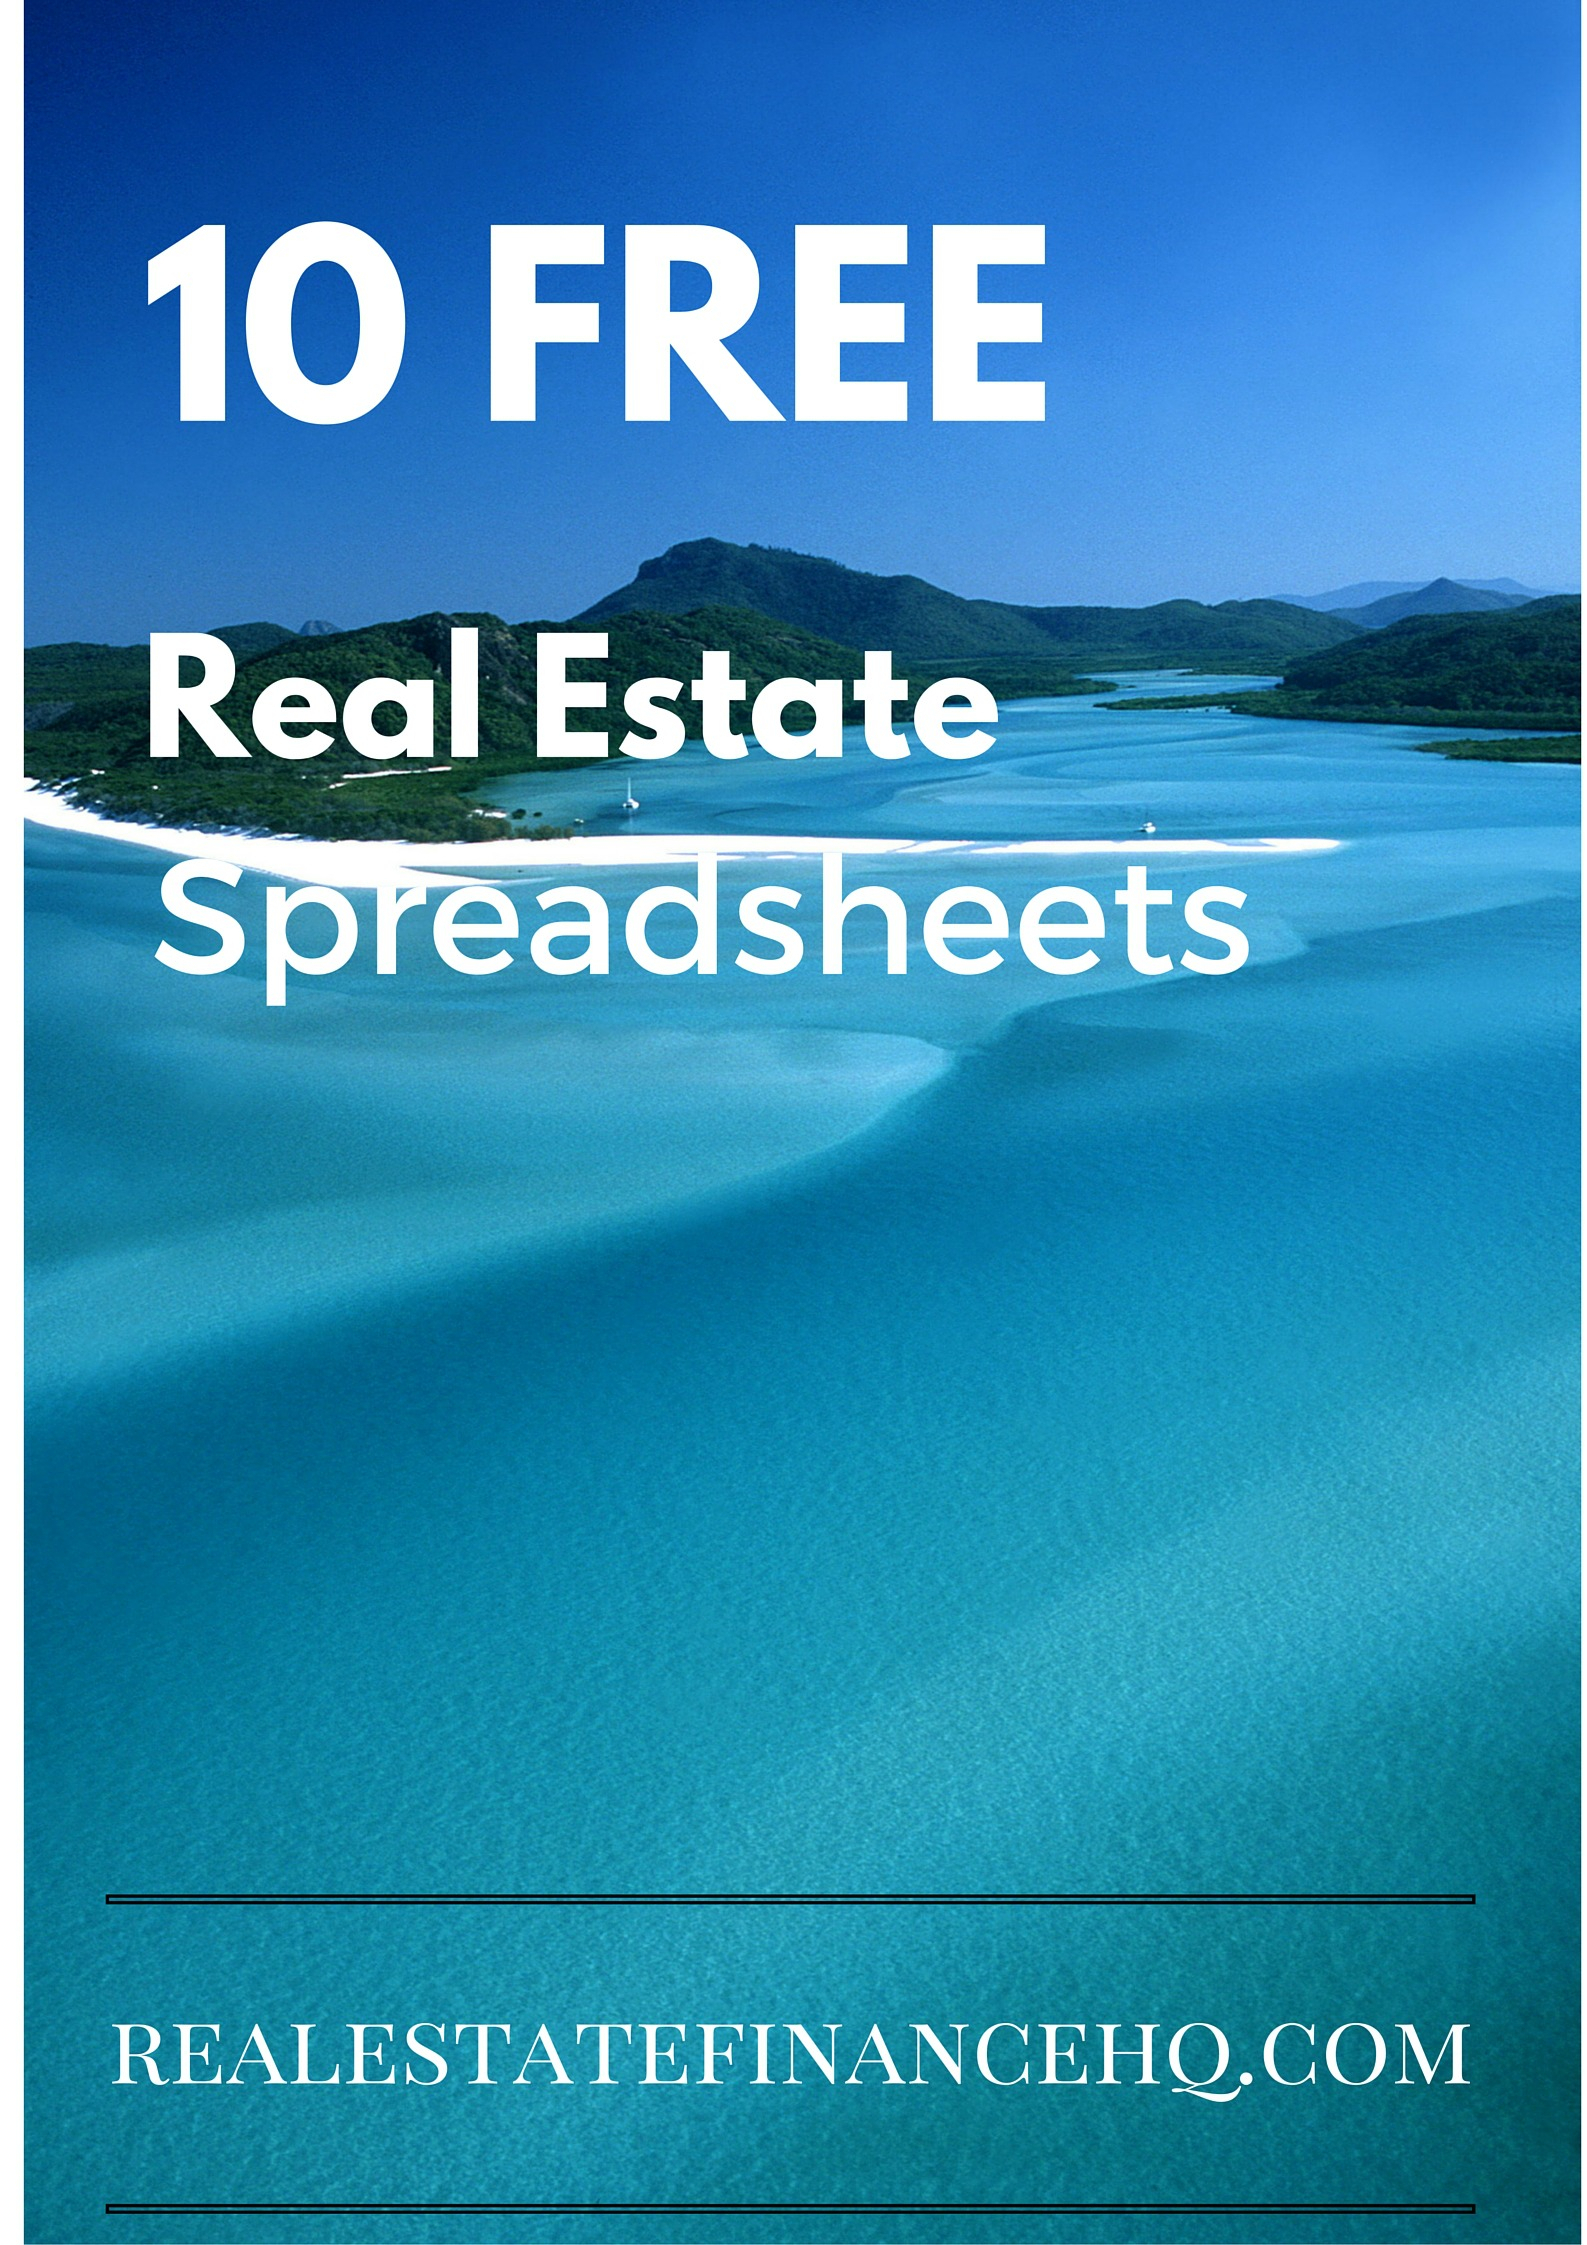 Real Estate Excel Spreadsheet Pertaining To 10 Free Real Estate Spreadsheets  Real Estate Finance